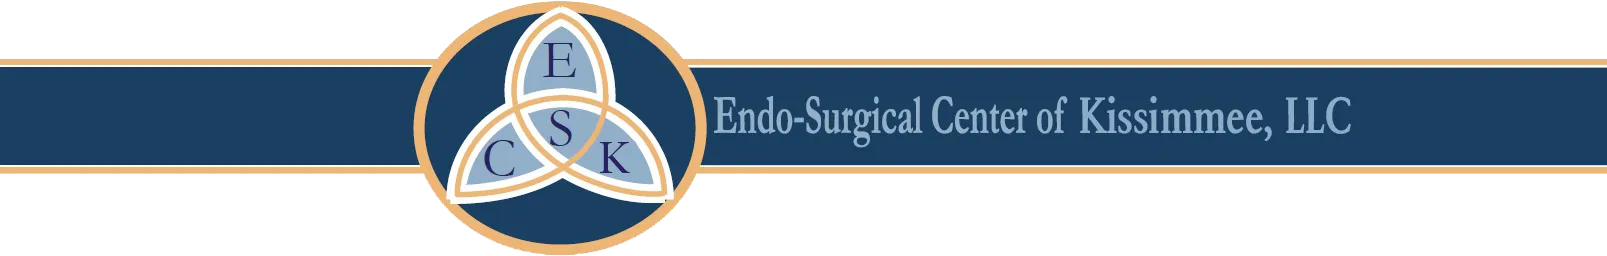 Endo-Surgical Center of Kissimmee